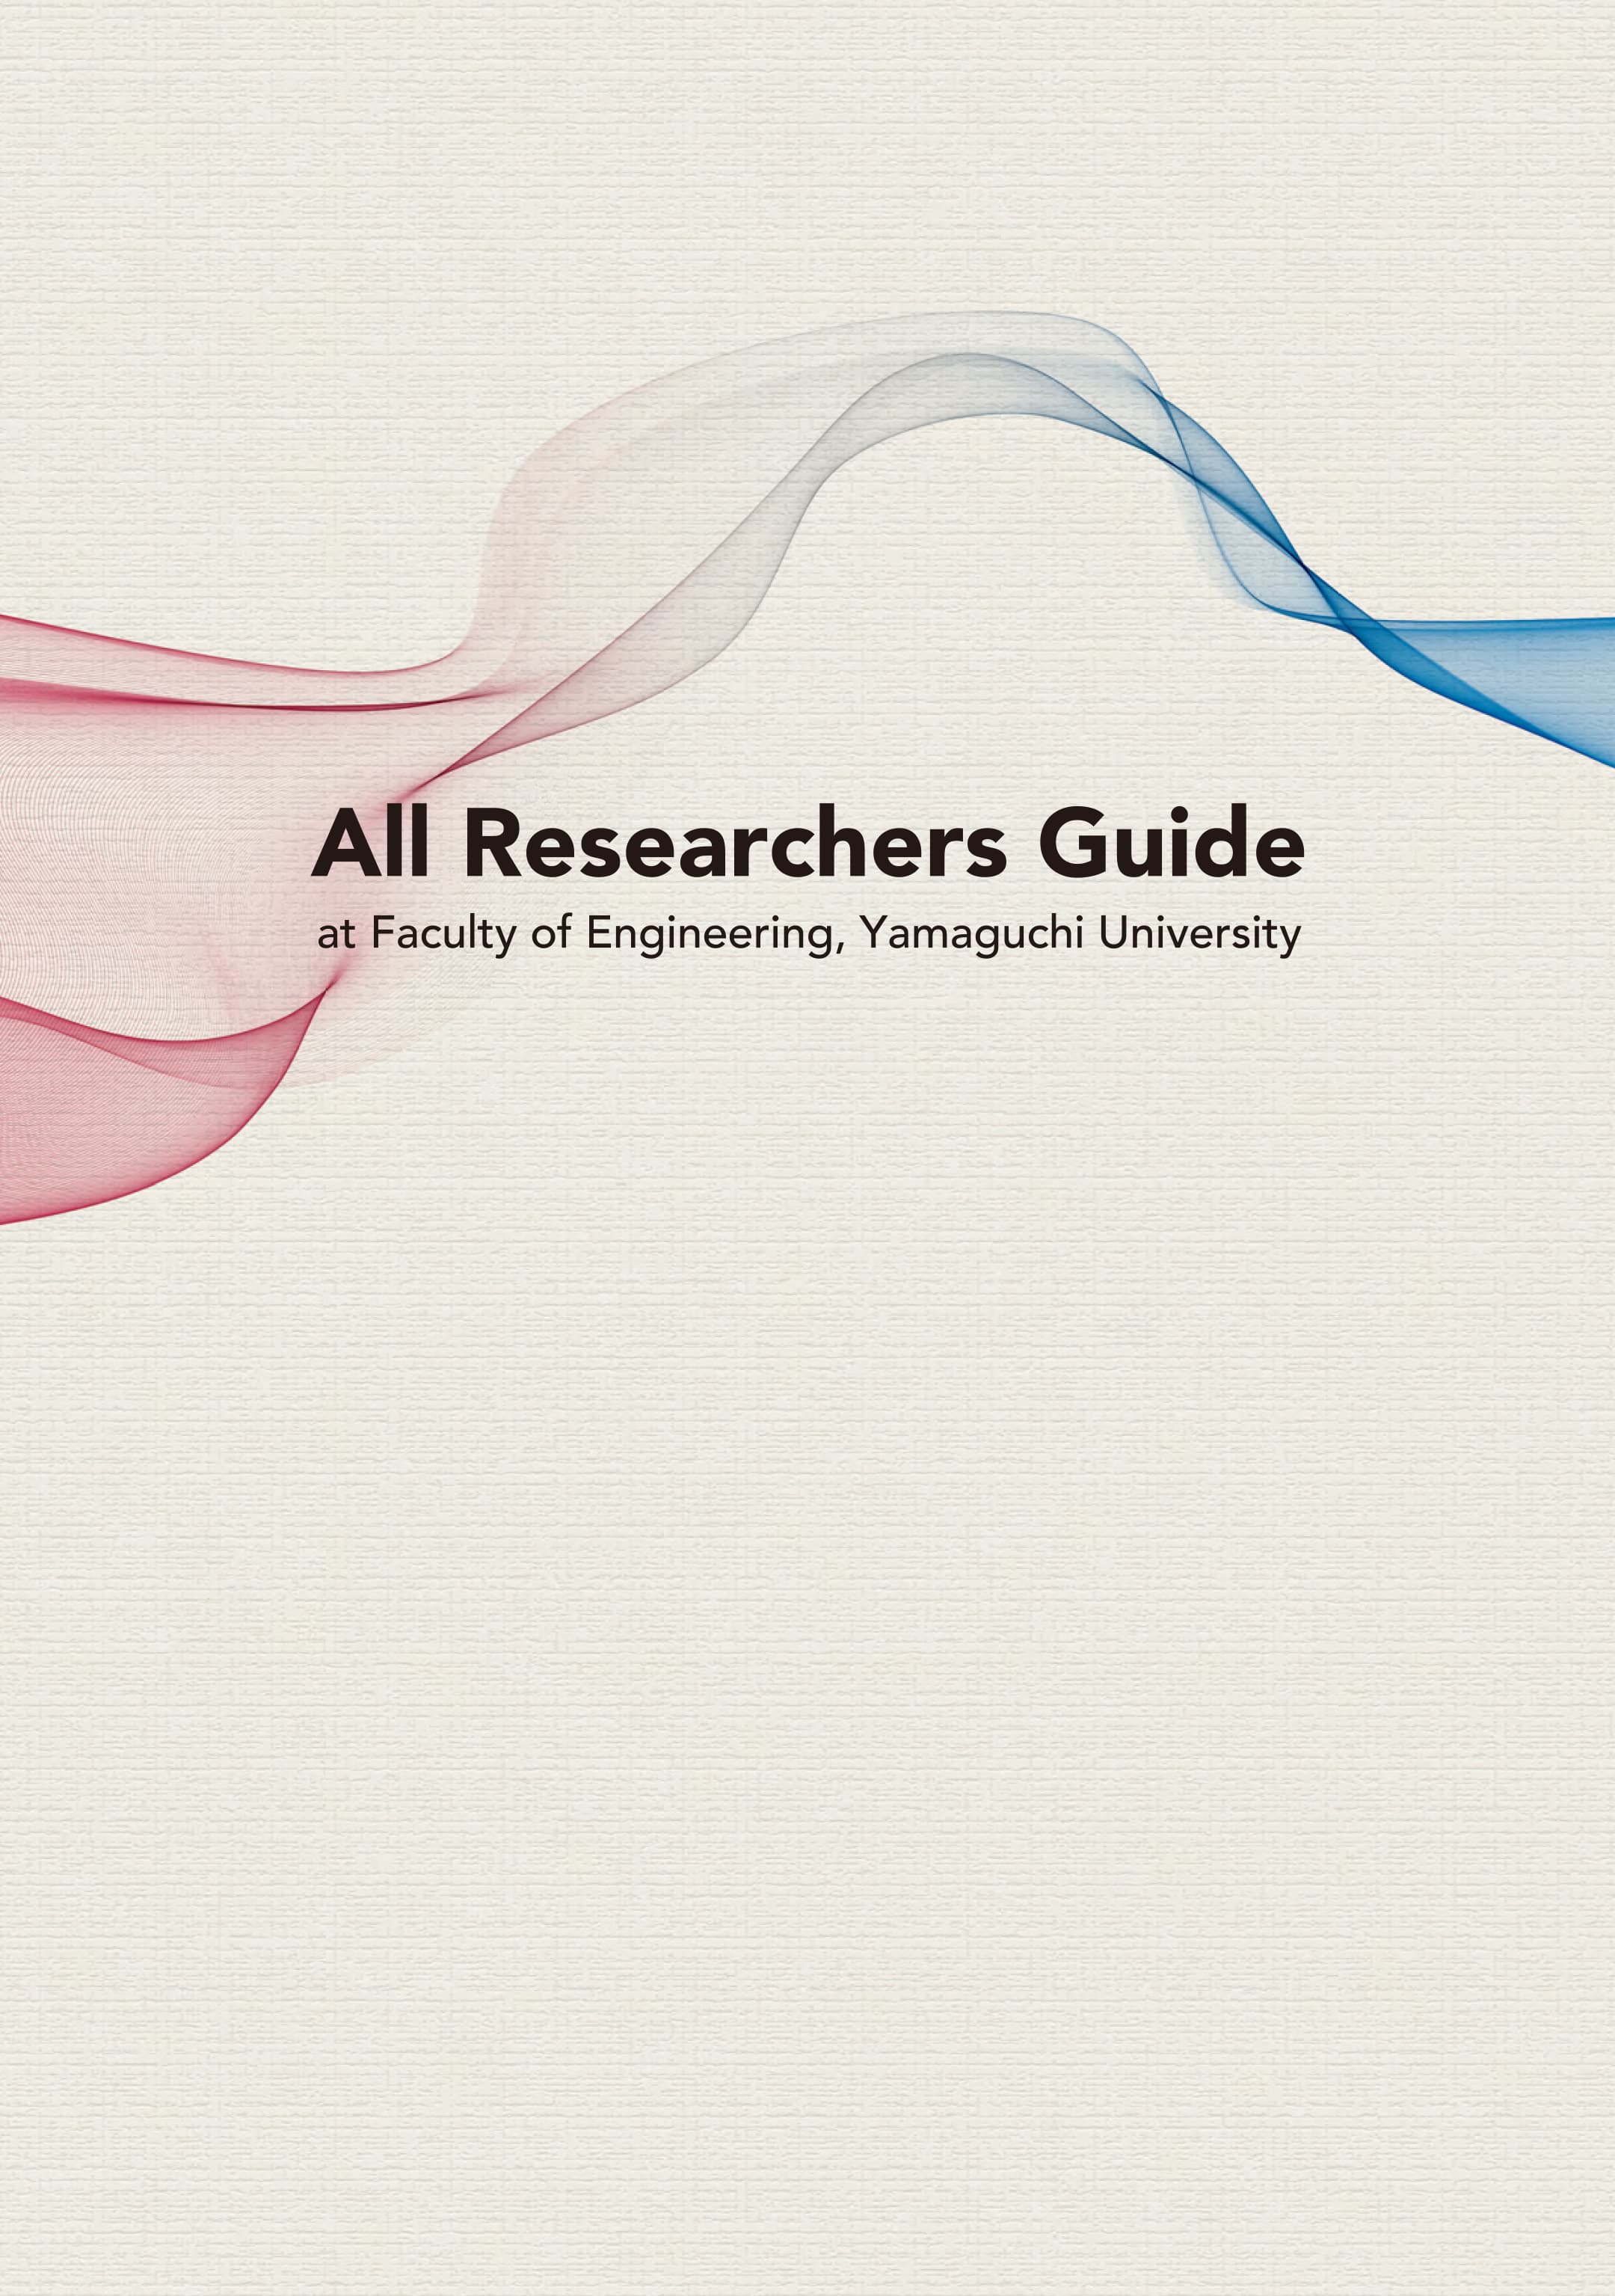 All Researchers Guide